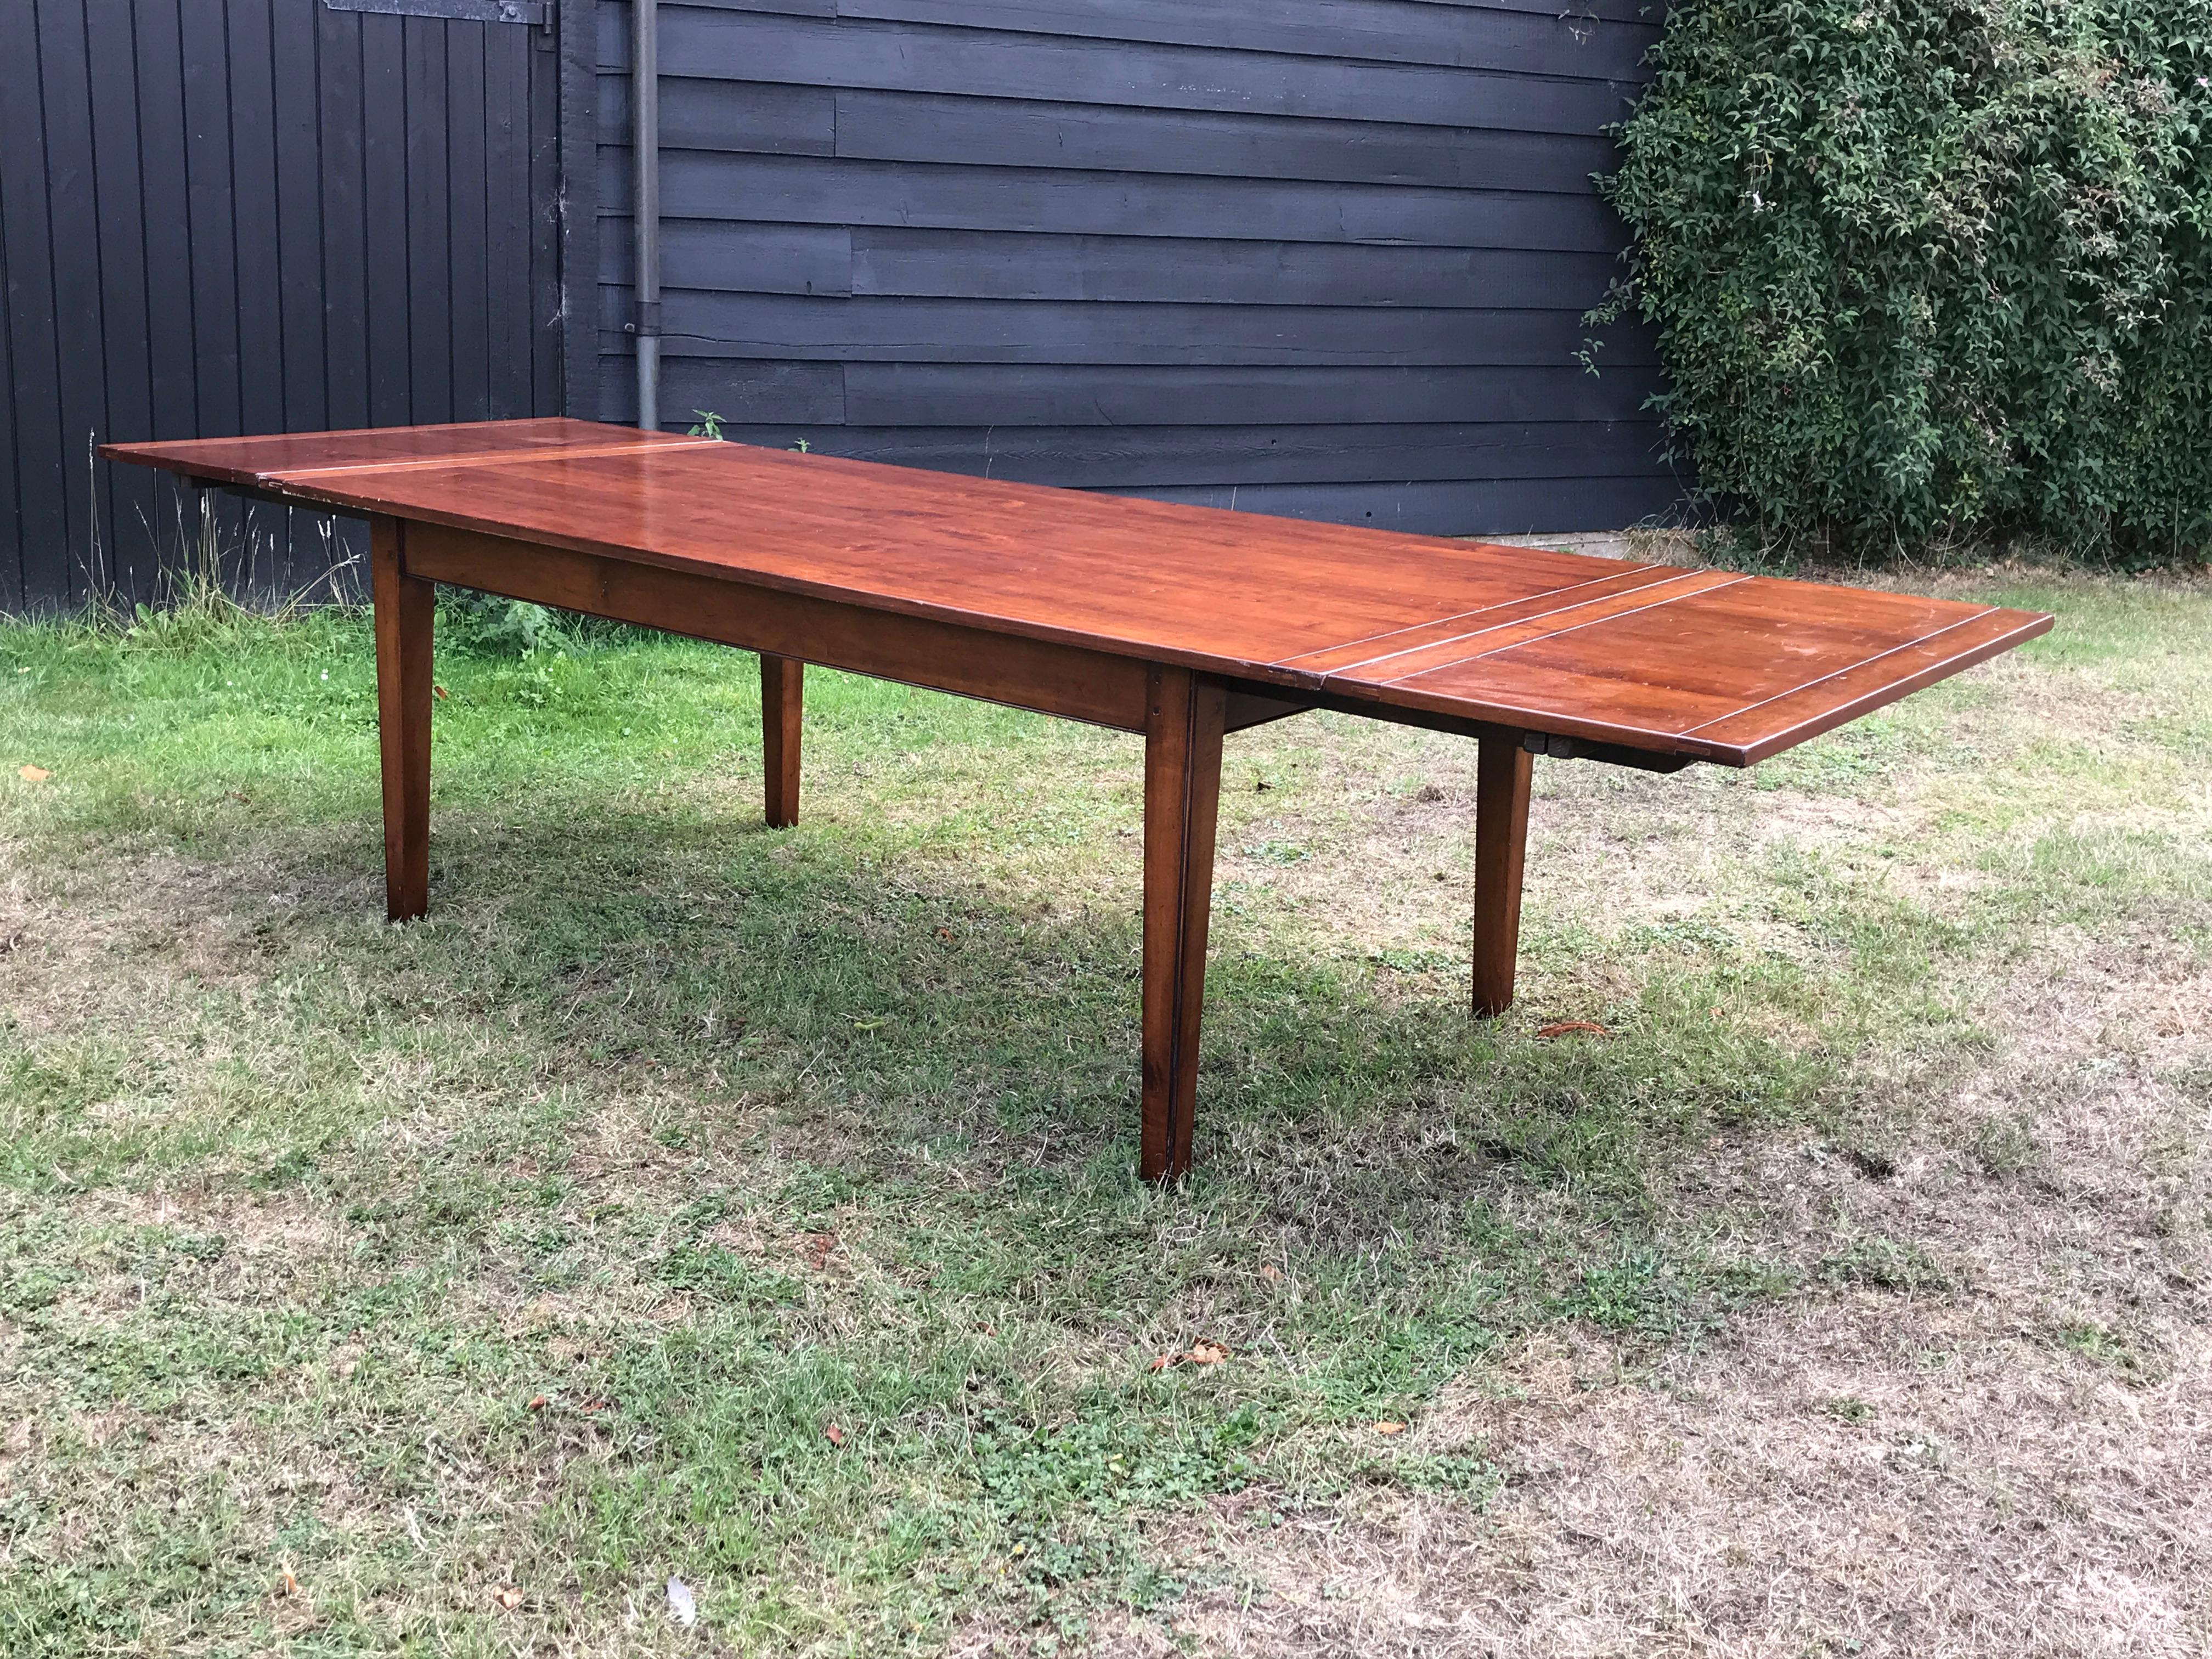 Joinery Table Drawleaf Fruitwood Cherry Mid-Century Modern 12 Seater Danish